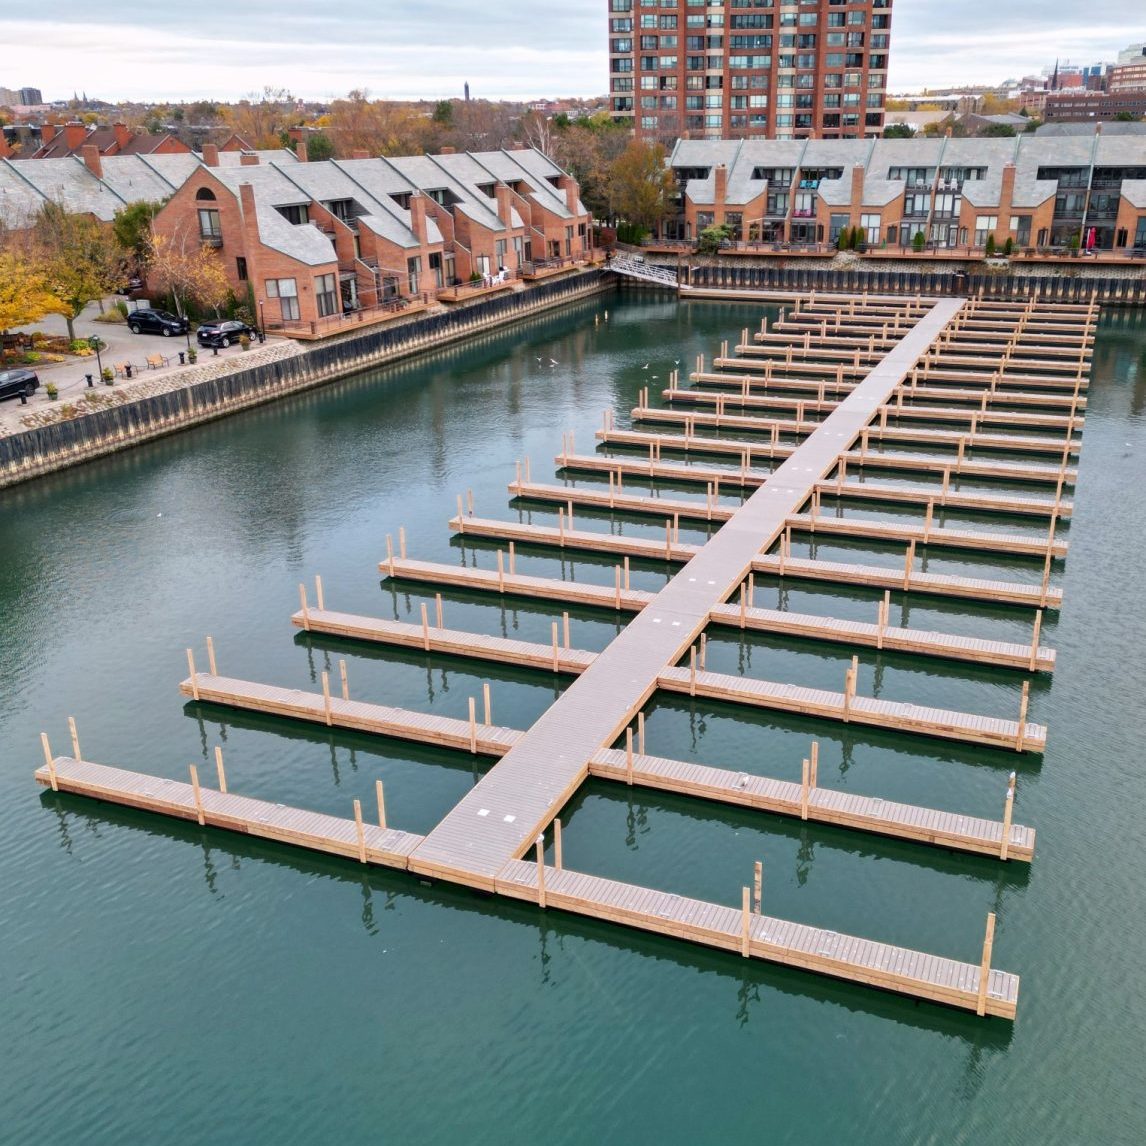 Commercial steel tube floating dock system with gray composite decking